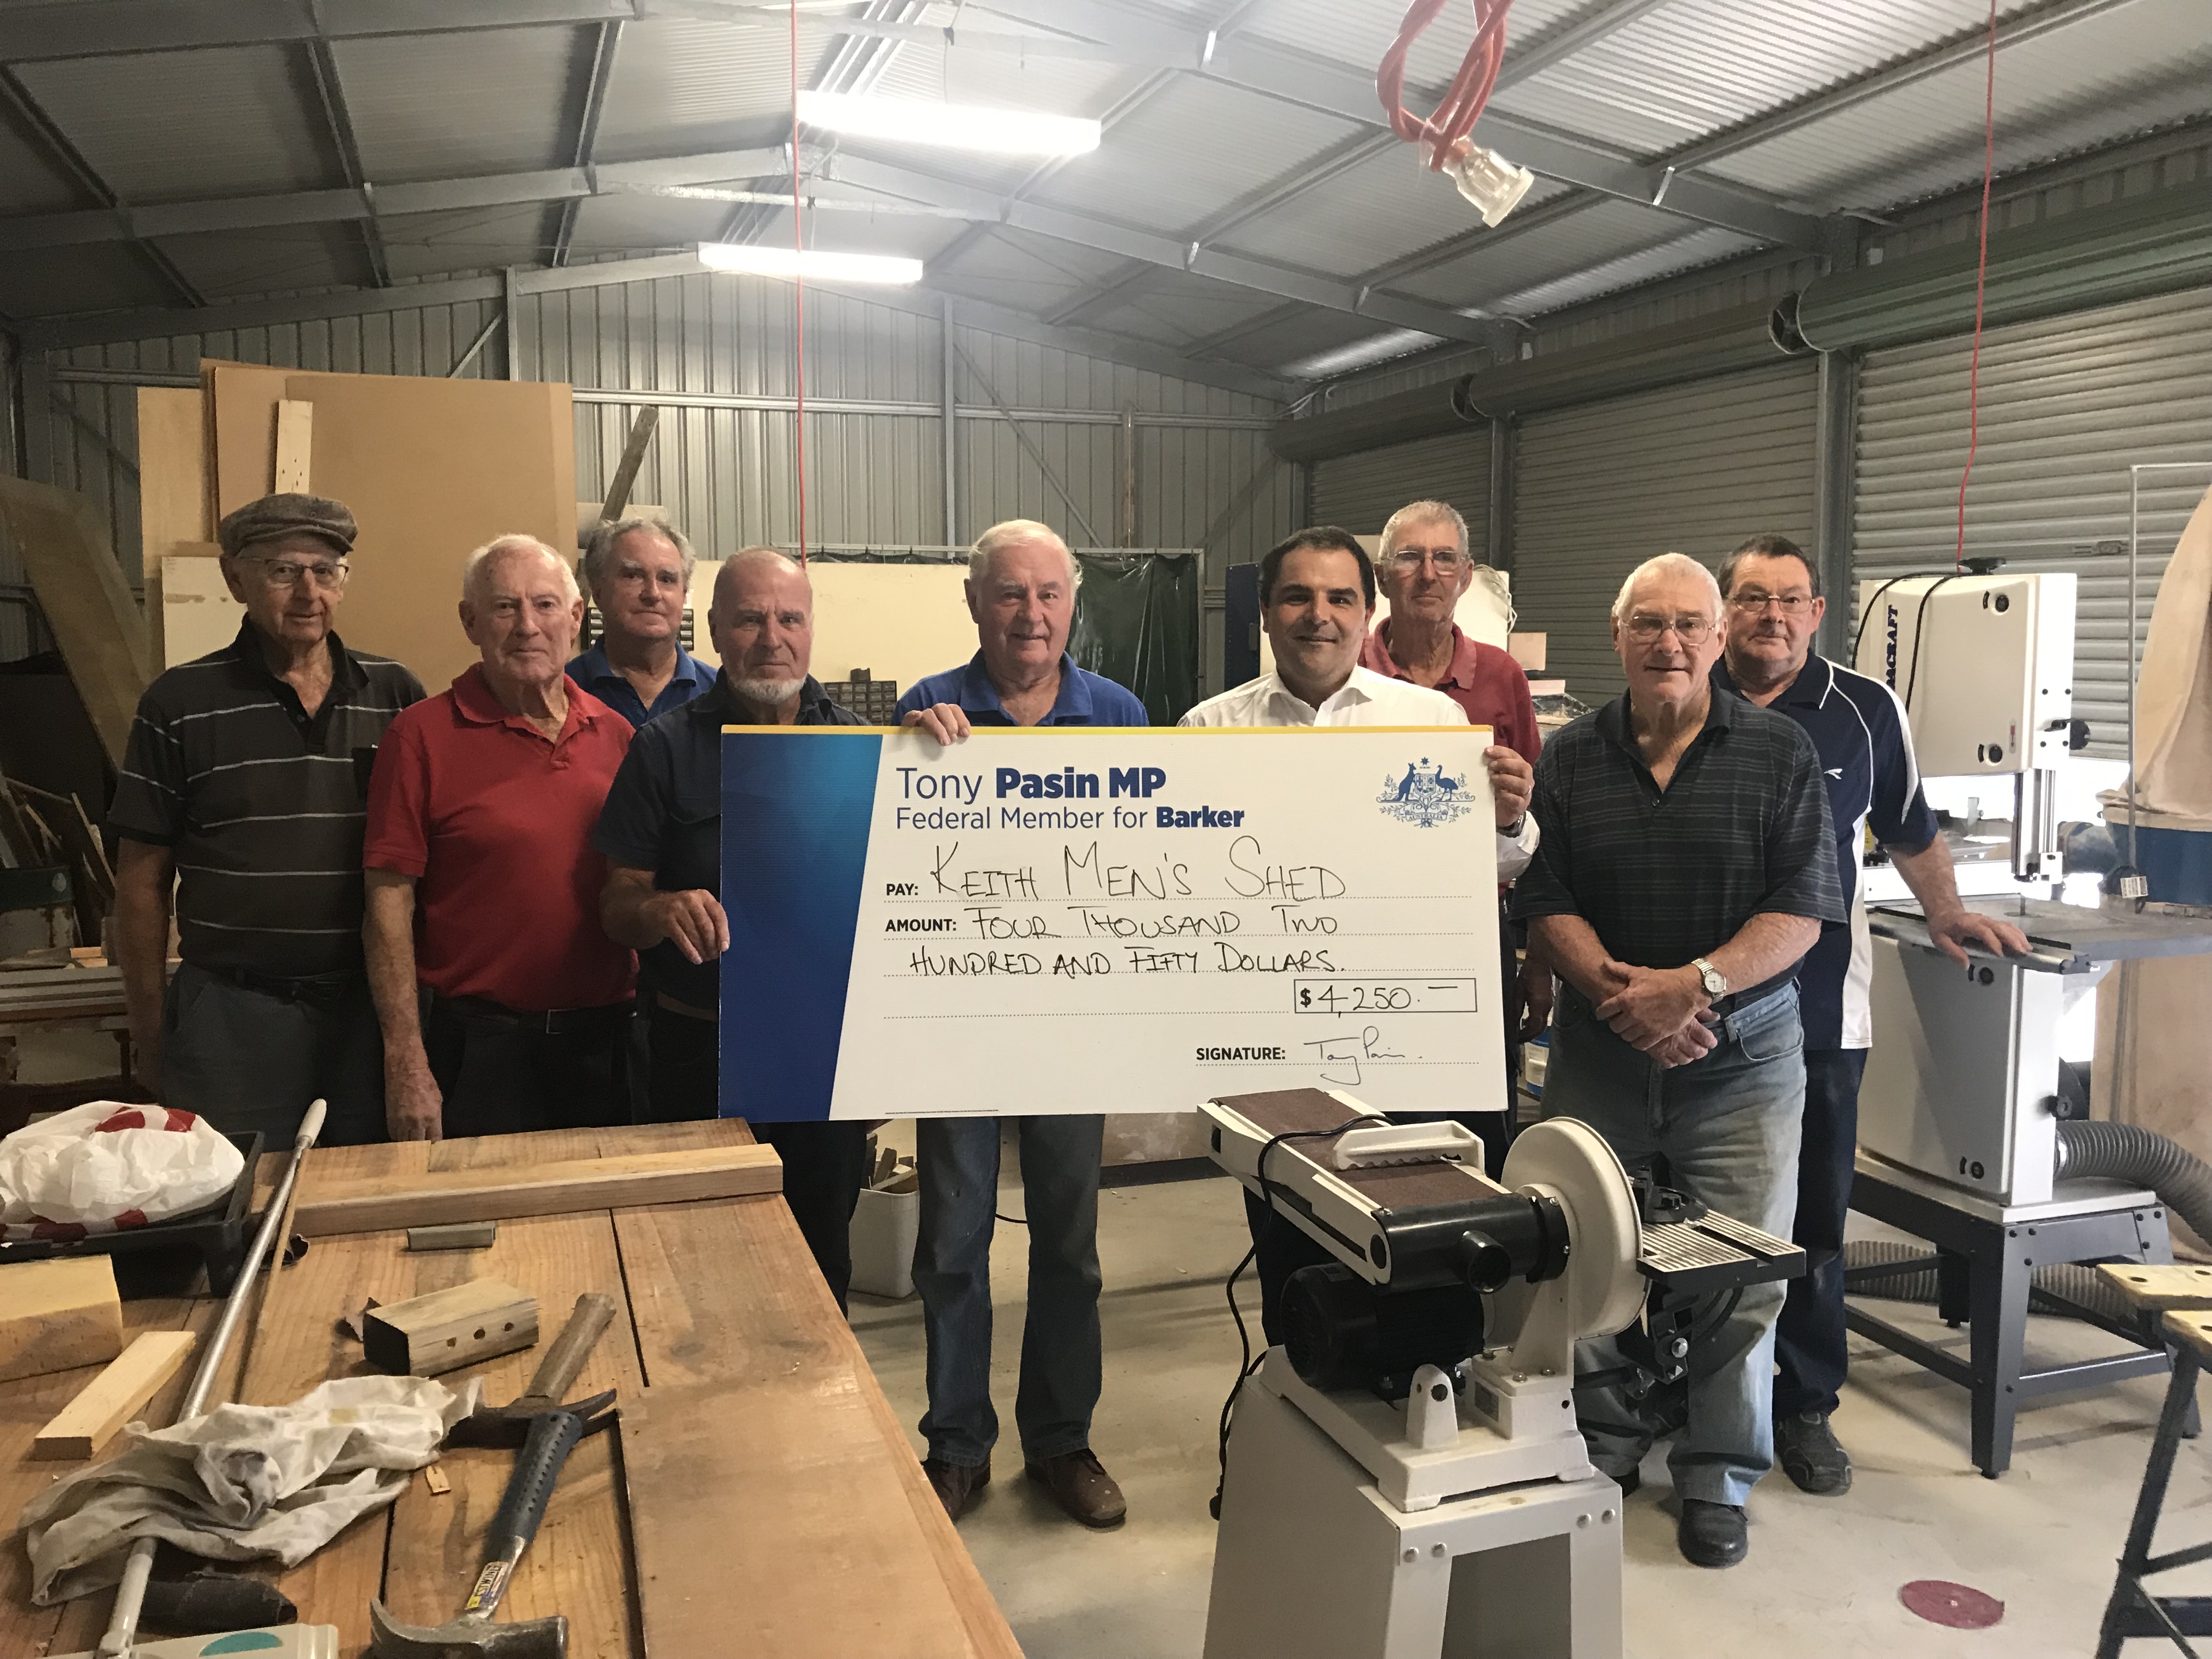 FUNDING DELIVERED FOR KEITH MENS SHED